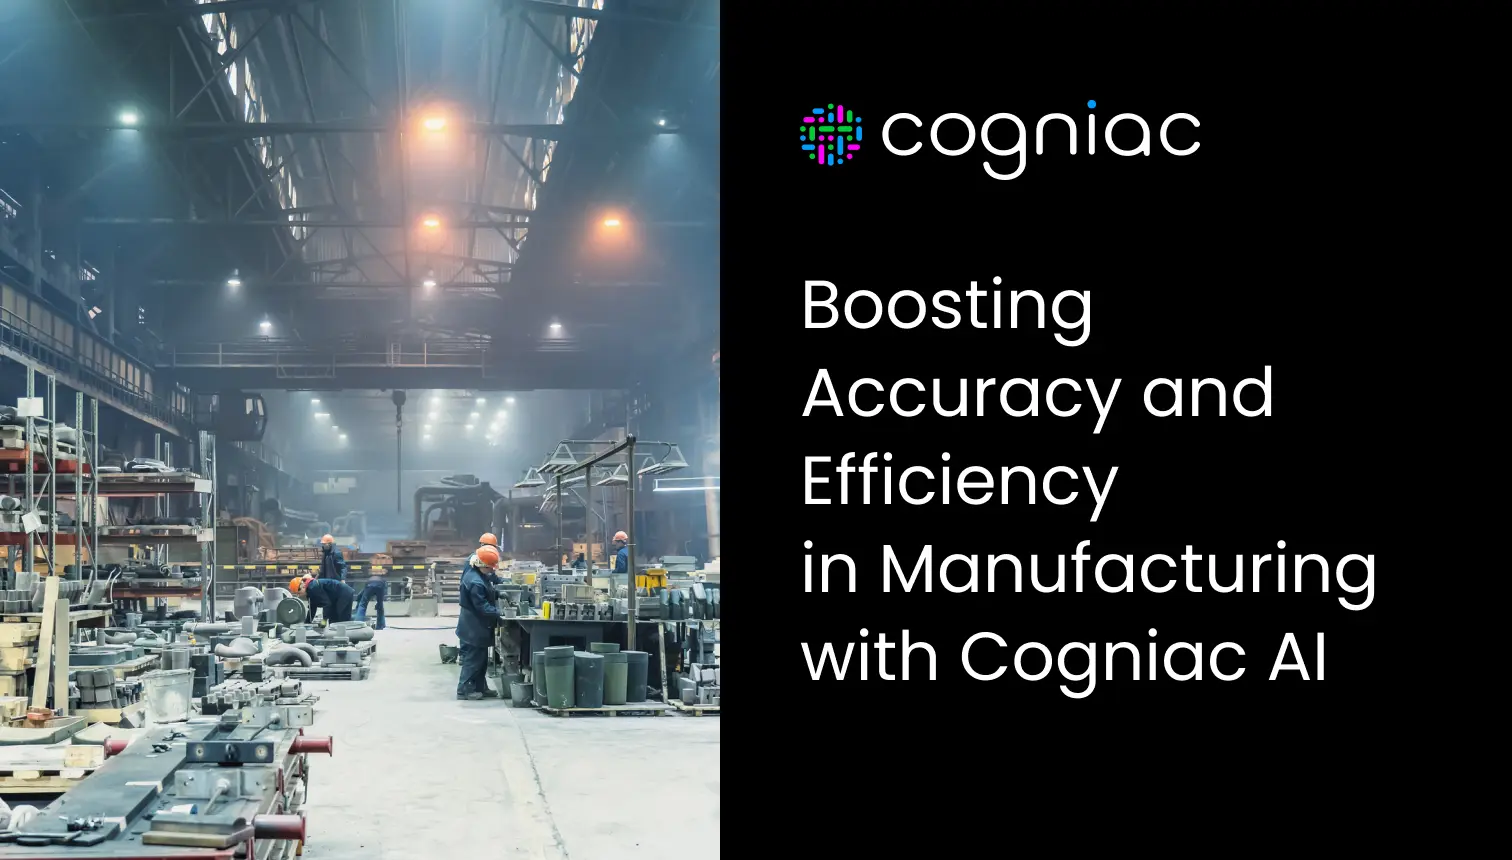 Cogniac’s HPO boosts accuracy and efficiency in manufacturing